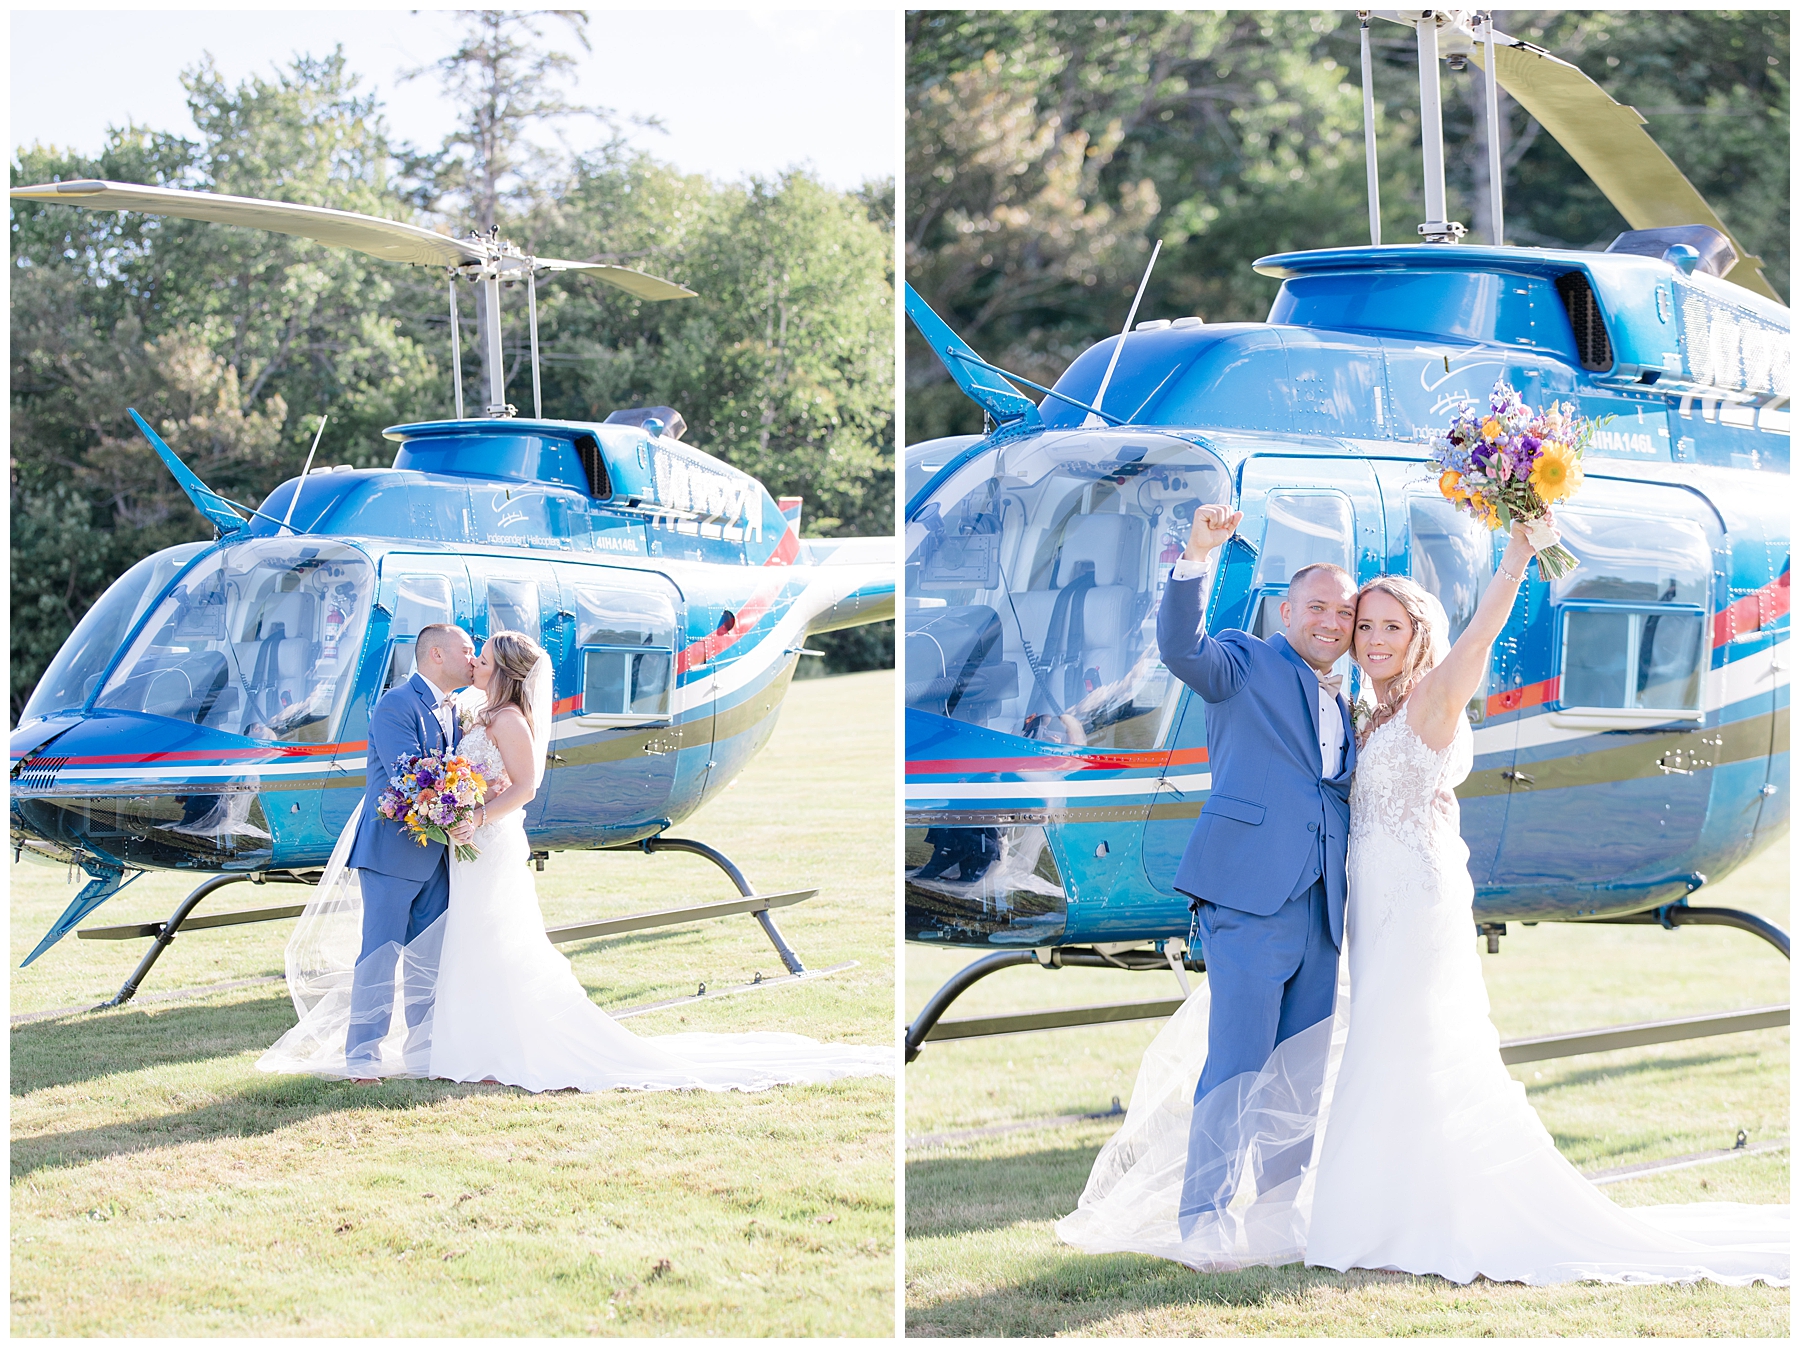 newlyweds take helicopter ride after wedding ceremony  